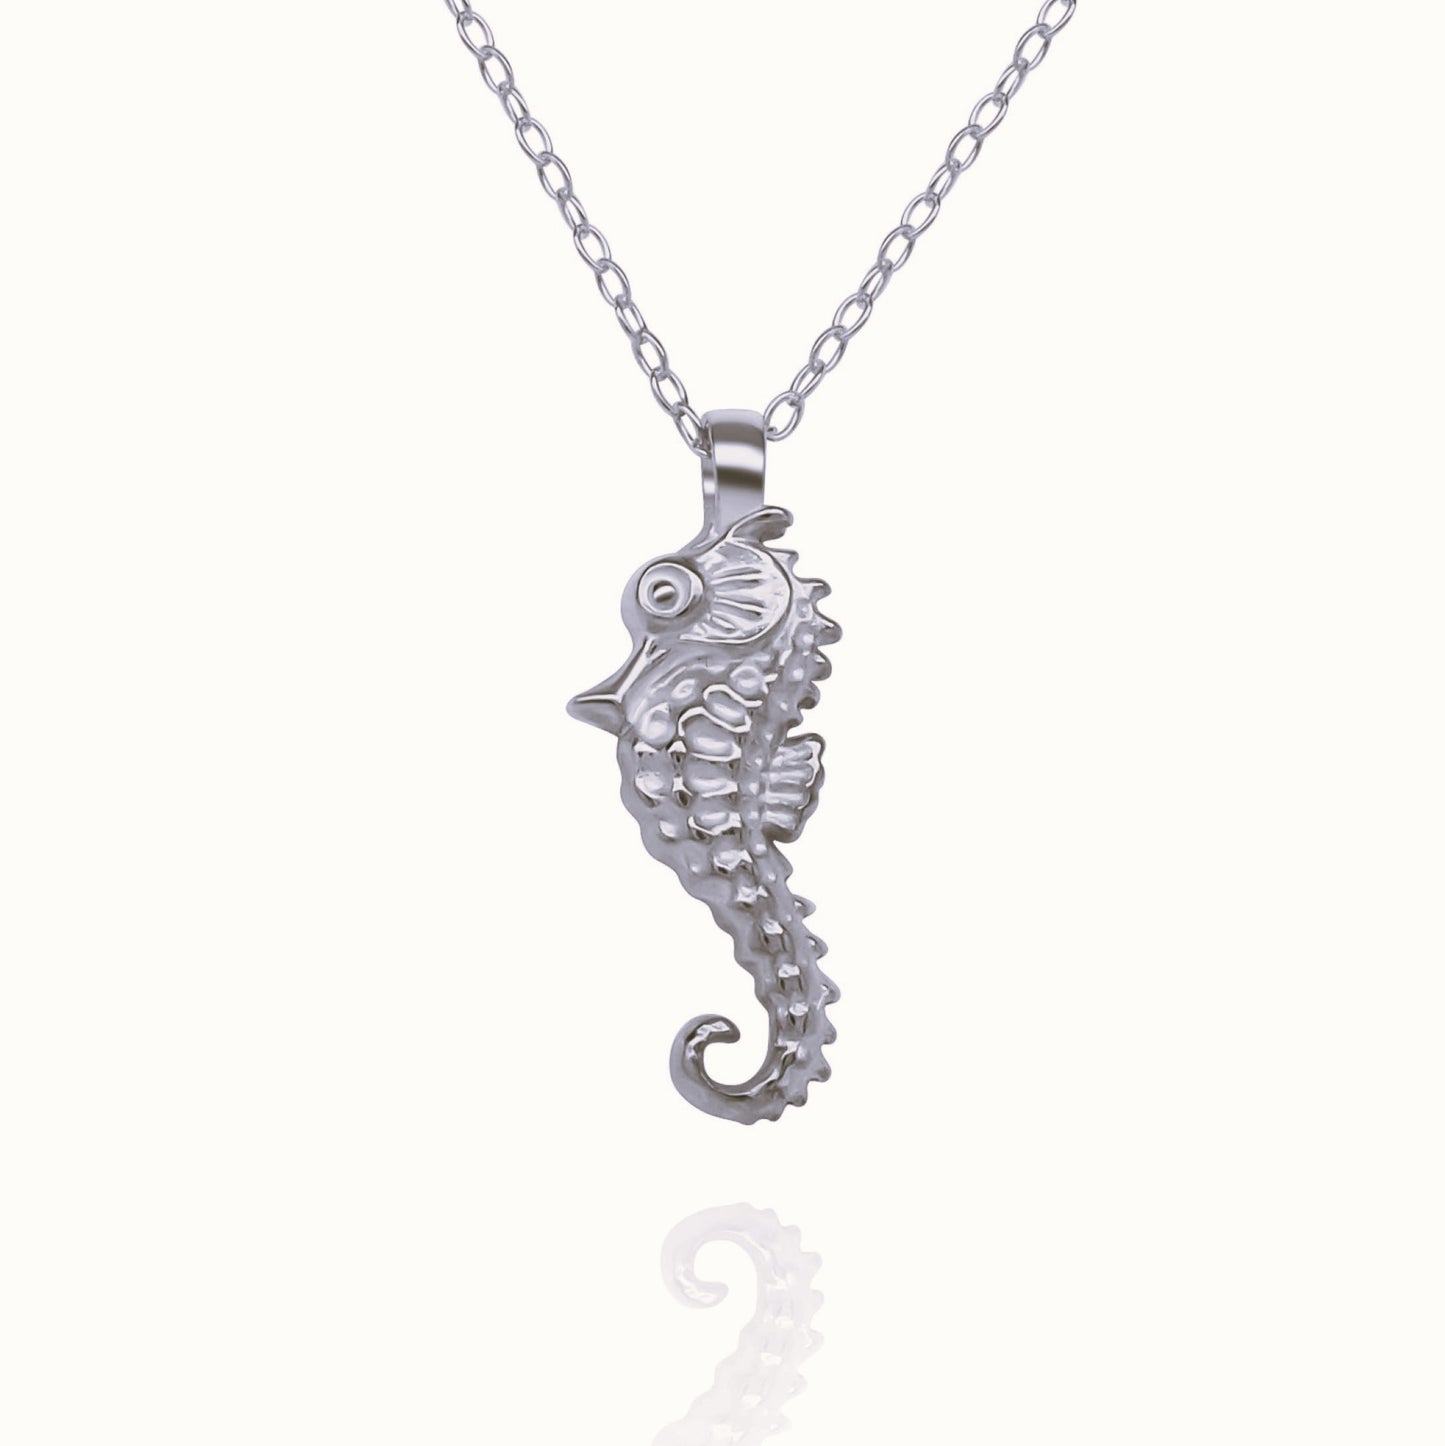 Platinum Seahorse charm with a solid platinum chain. Made to order. © Adrian Ashley